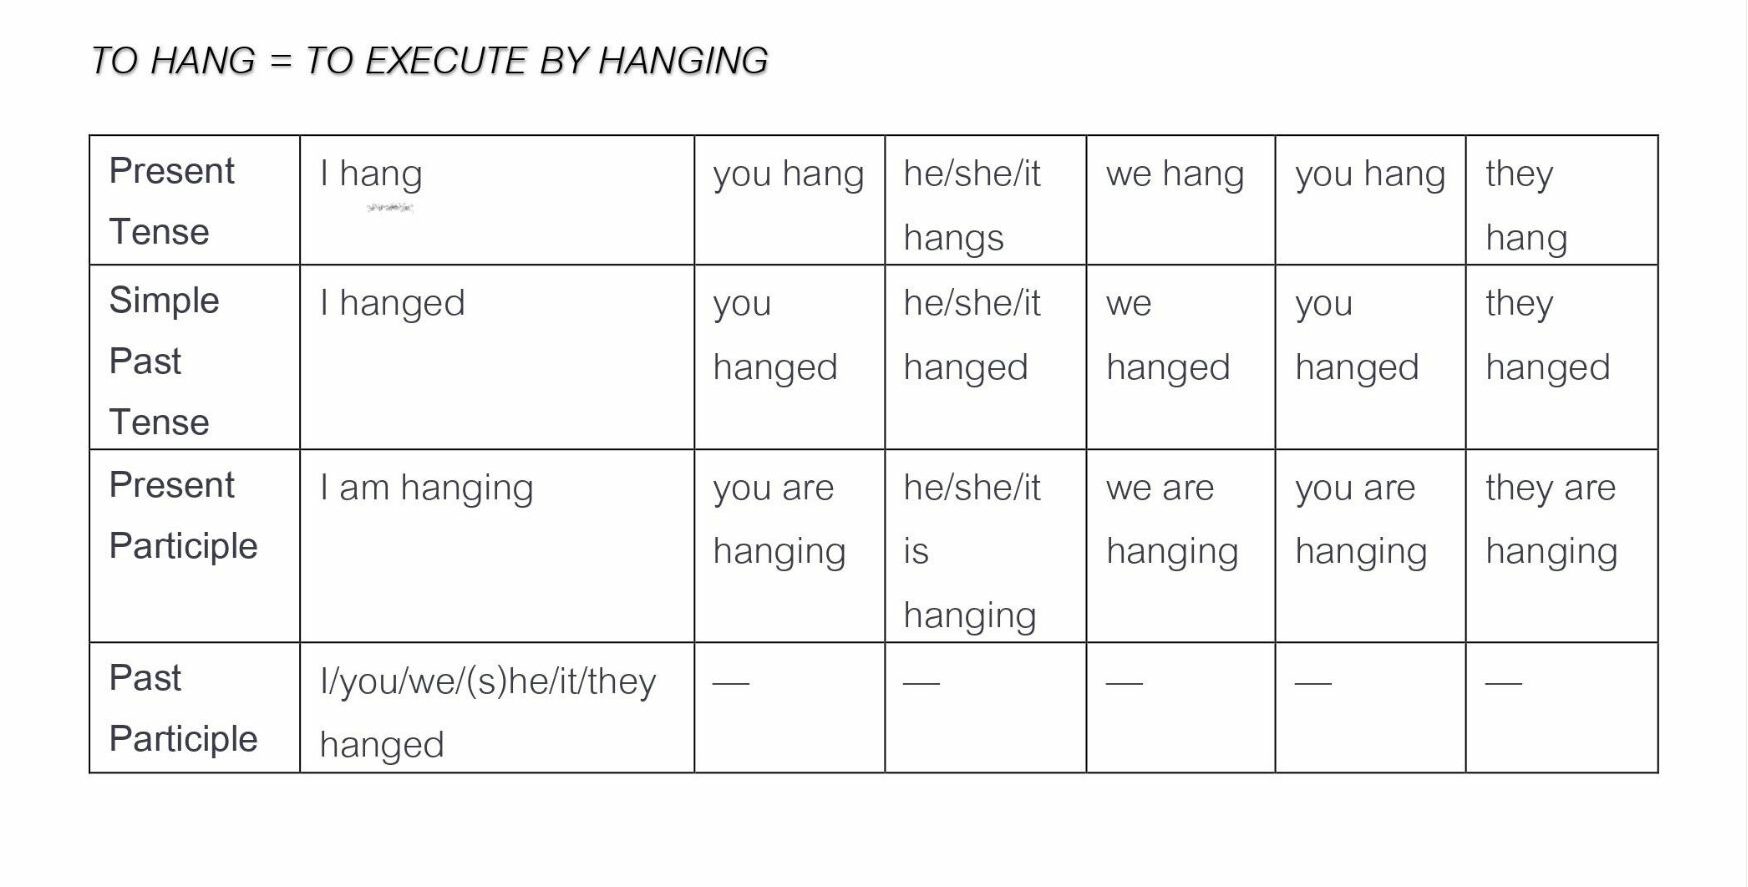 Hanged vs. hung: a complete conjugation chart of "to hang"